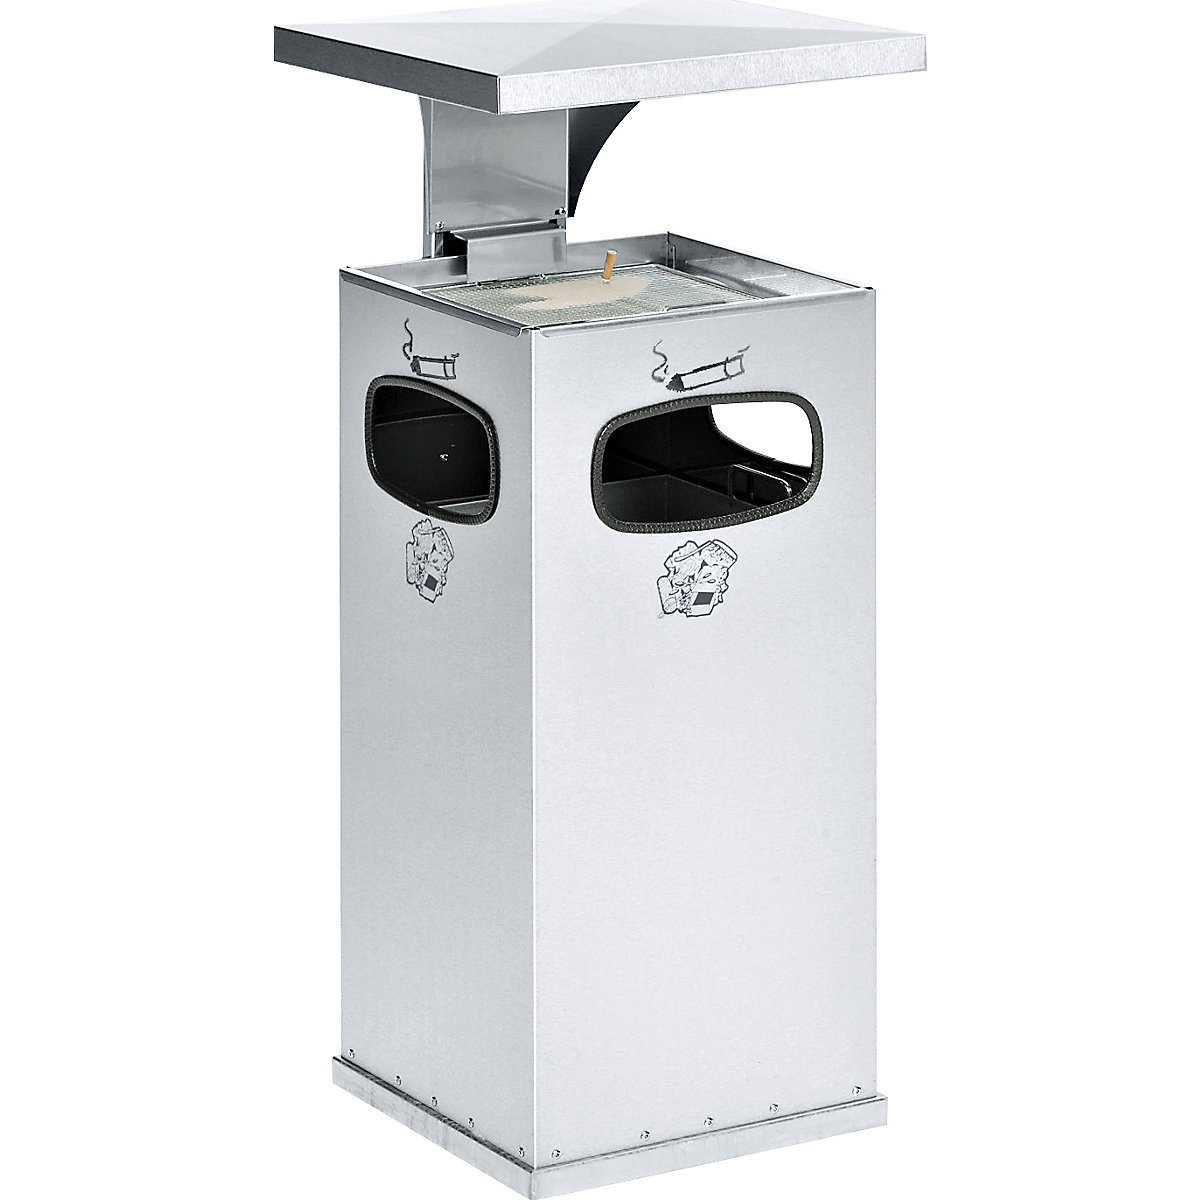 Waste collector with ashtray insert - VAR